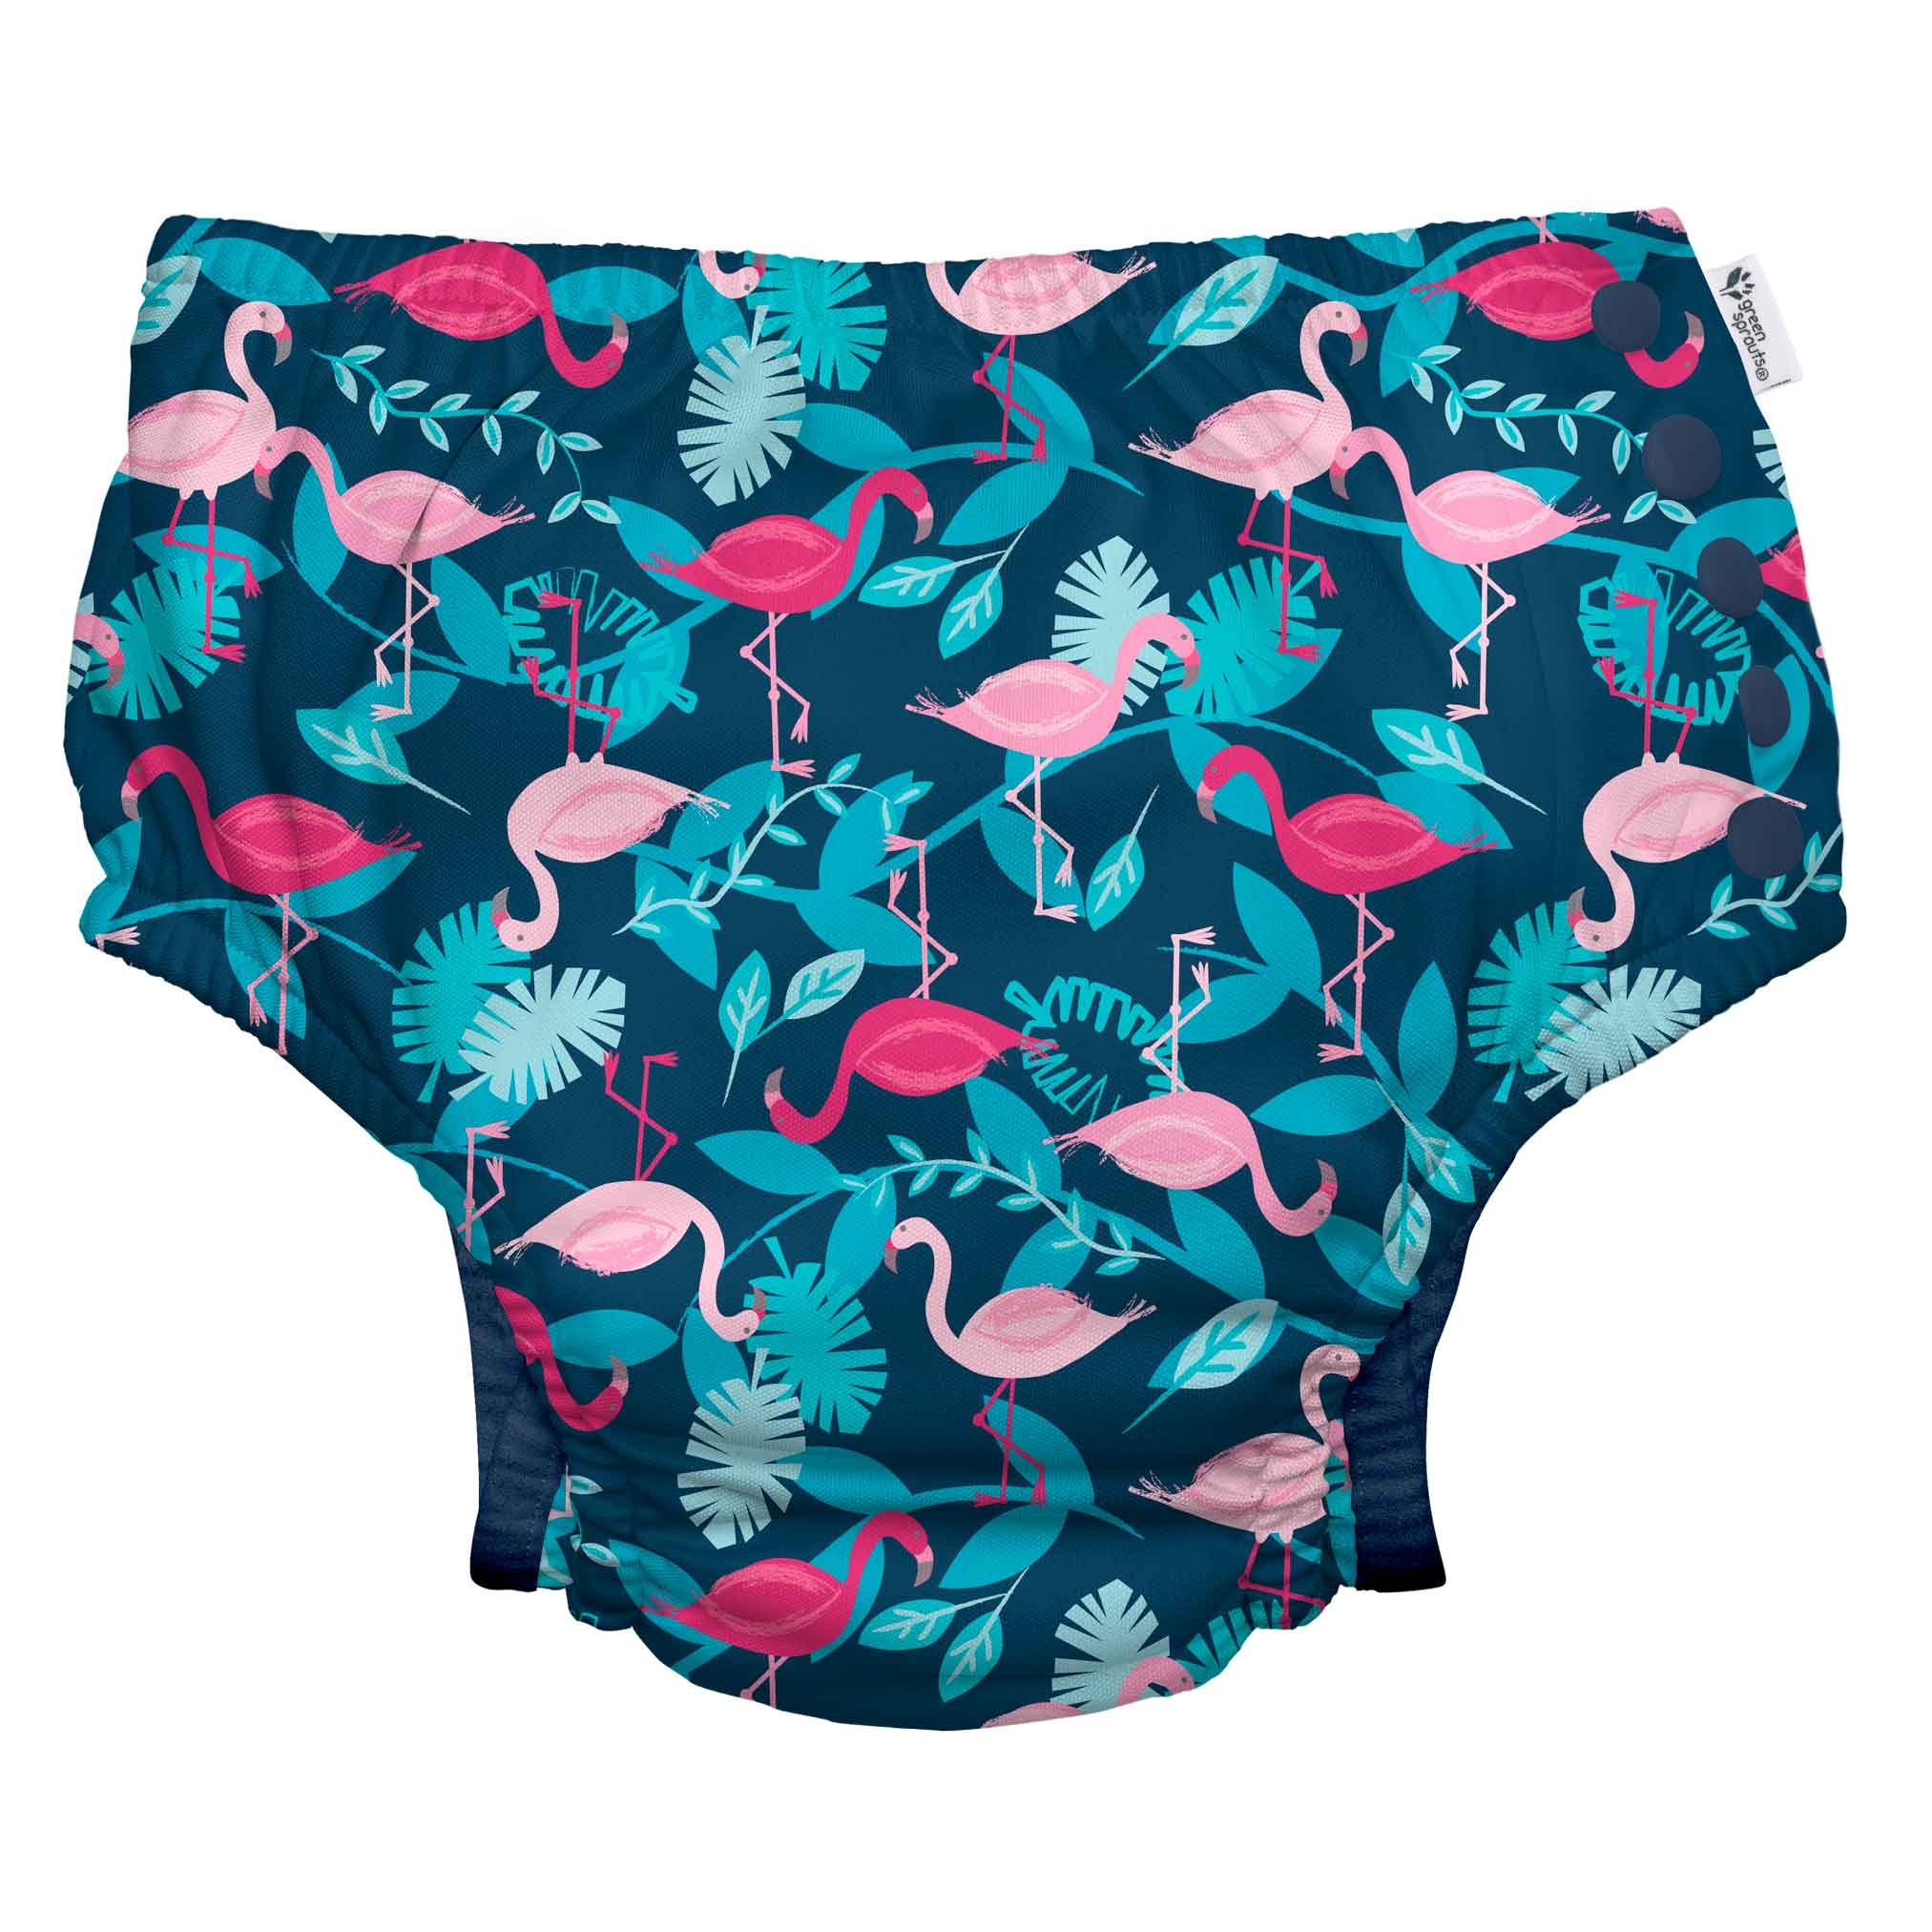 Tropical fun meets leakproof protection! The Eco Snap Swim Diaper (Tropical Collection) offers UPF 50+ sun protection, gussets for extra defense, & recycled materials. Shop worry-free, eco-friendly swimming now!